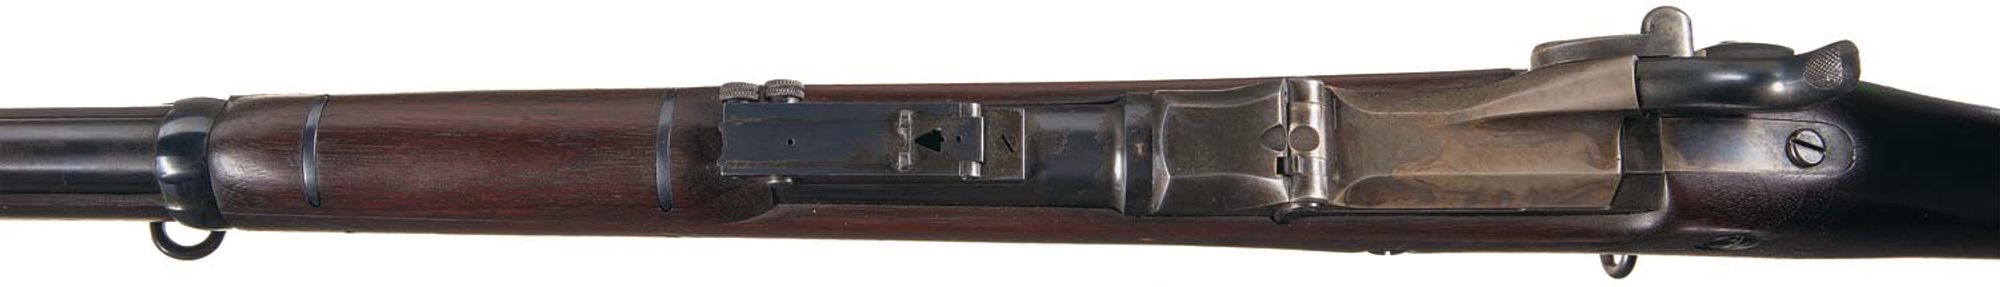 Lot 1482: Extremely Rare Martially Inspected U.S. Springfield 1892 Dated .30 Calibre Experimental Trapdoor Rifle Number "I"